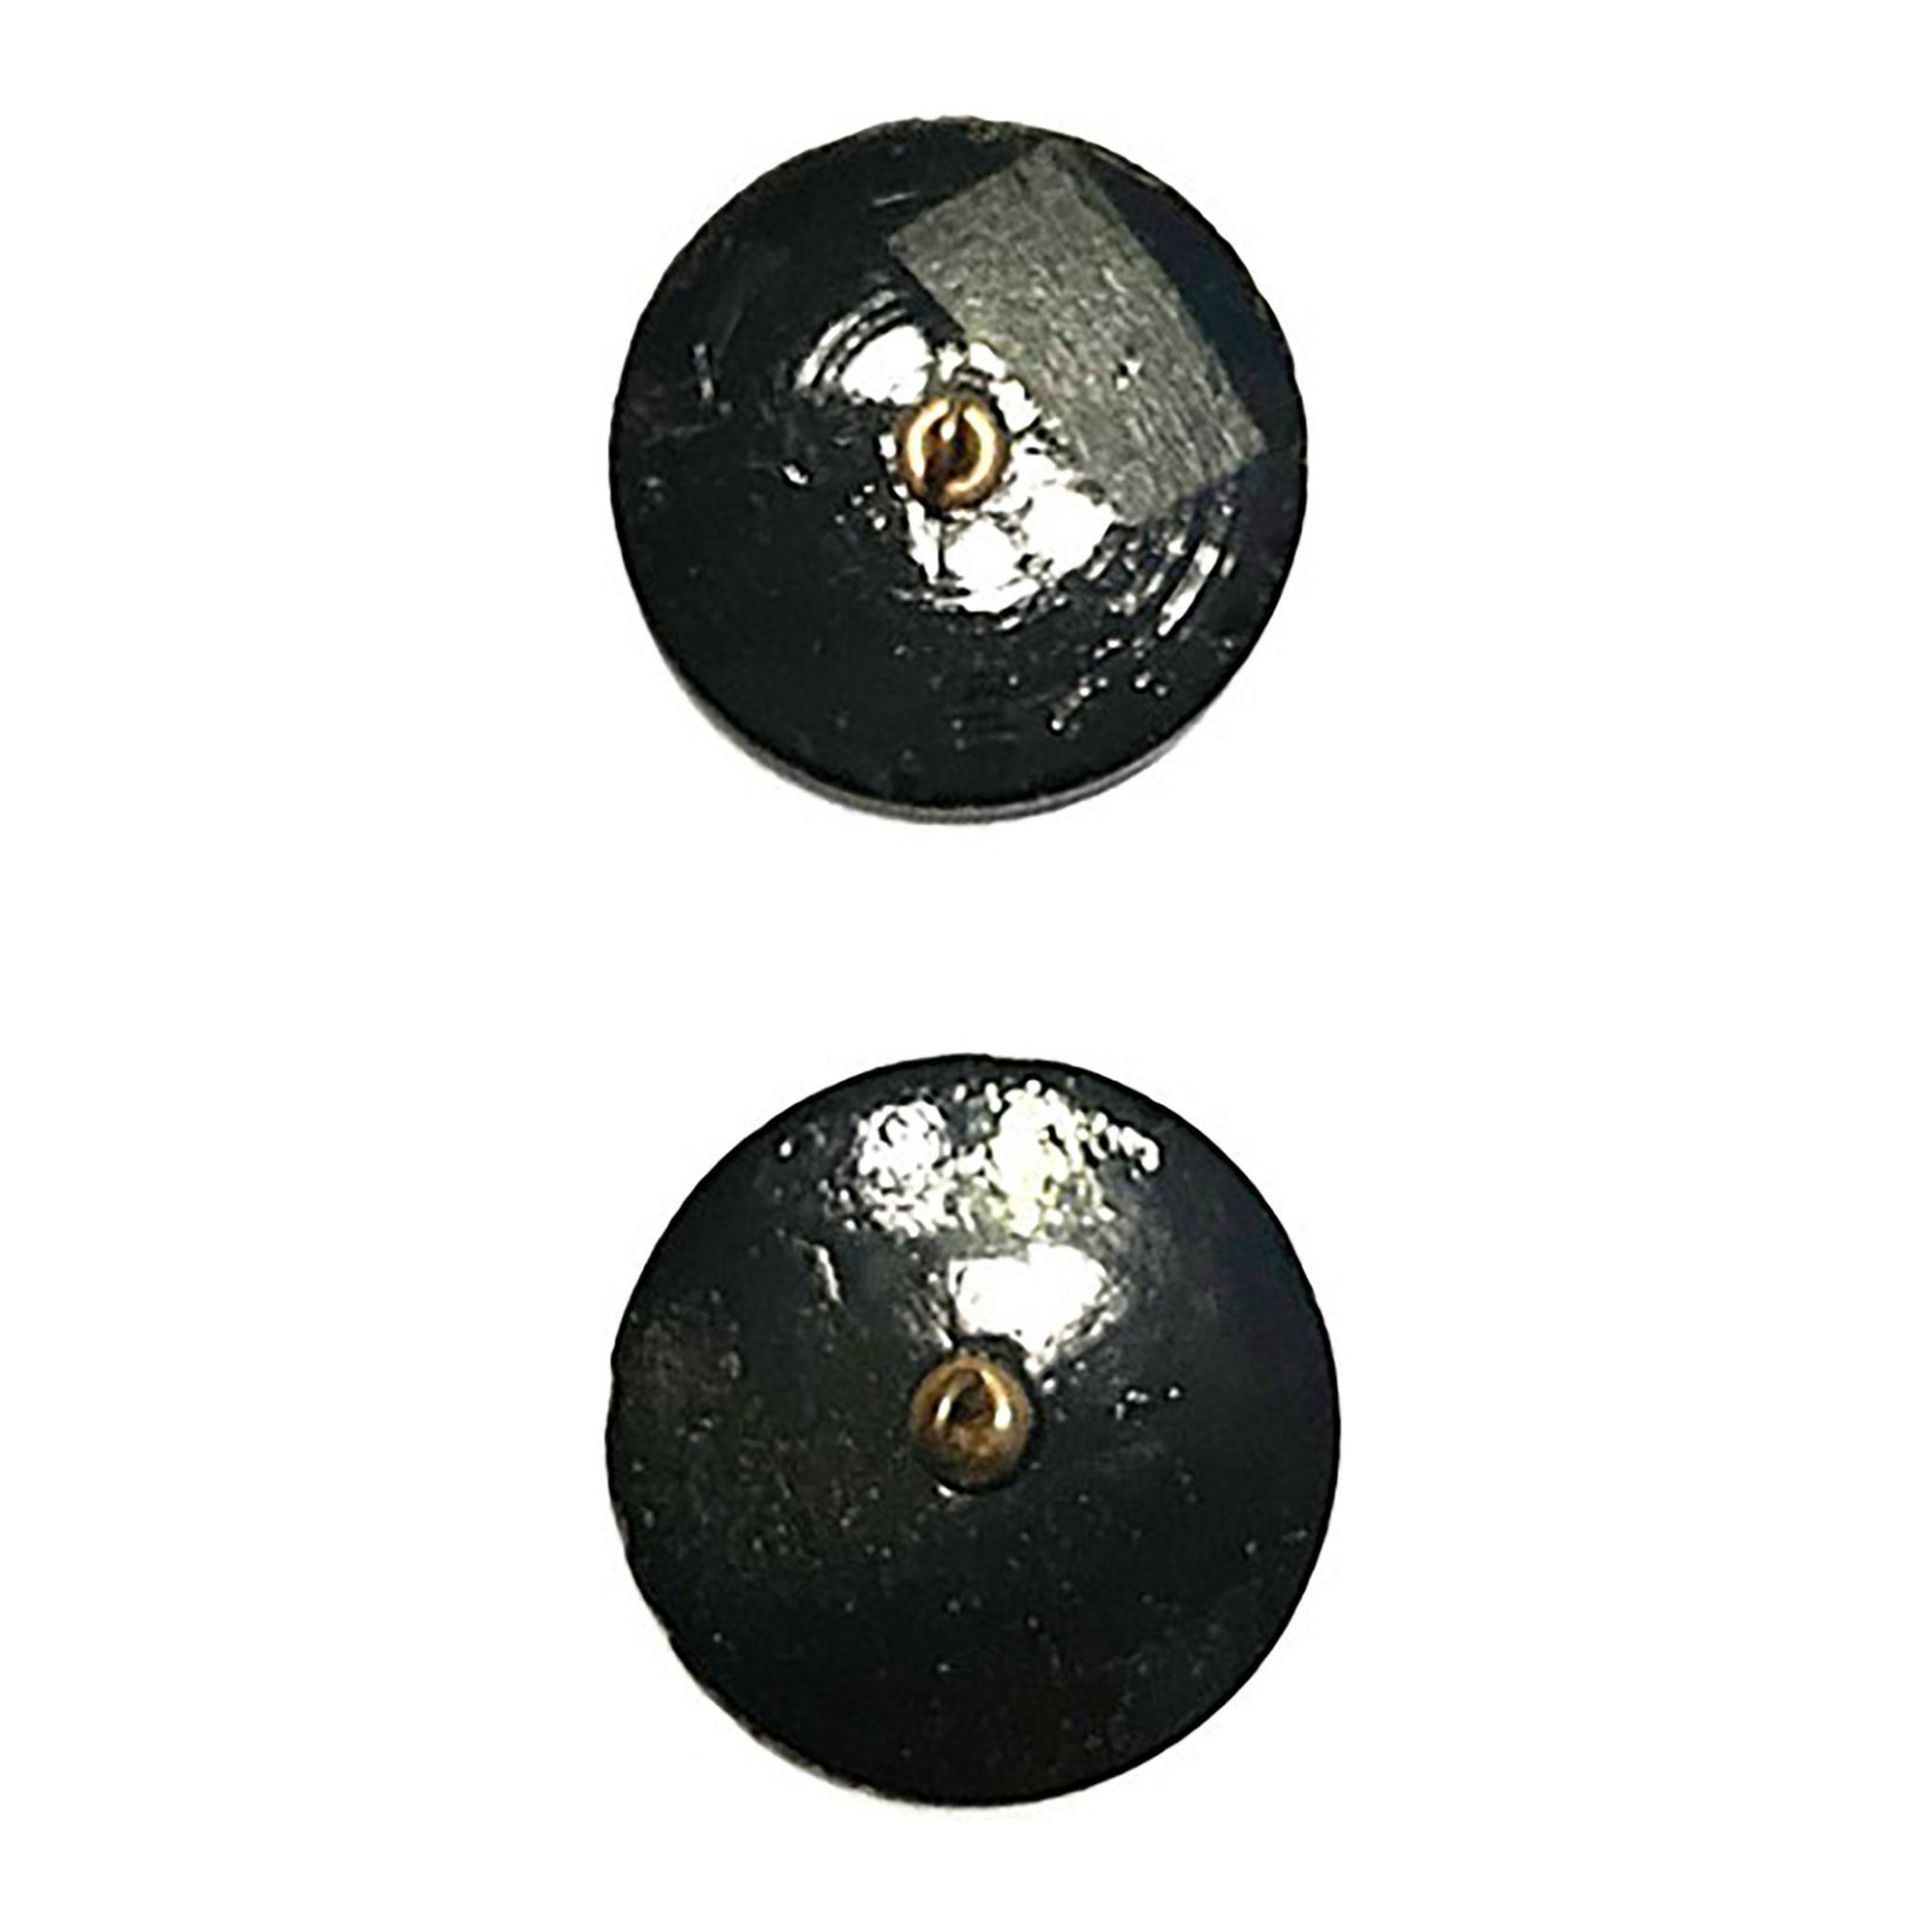 Small card of division 1 pictorial black glass buttons - Bild 4 aus 4